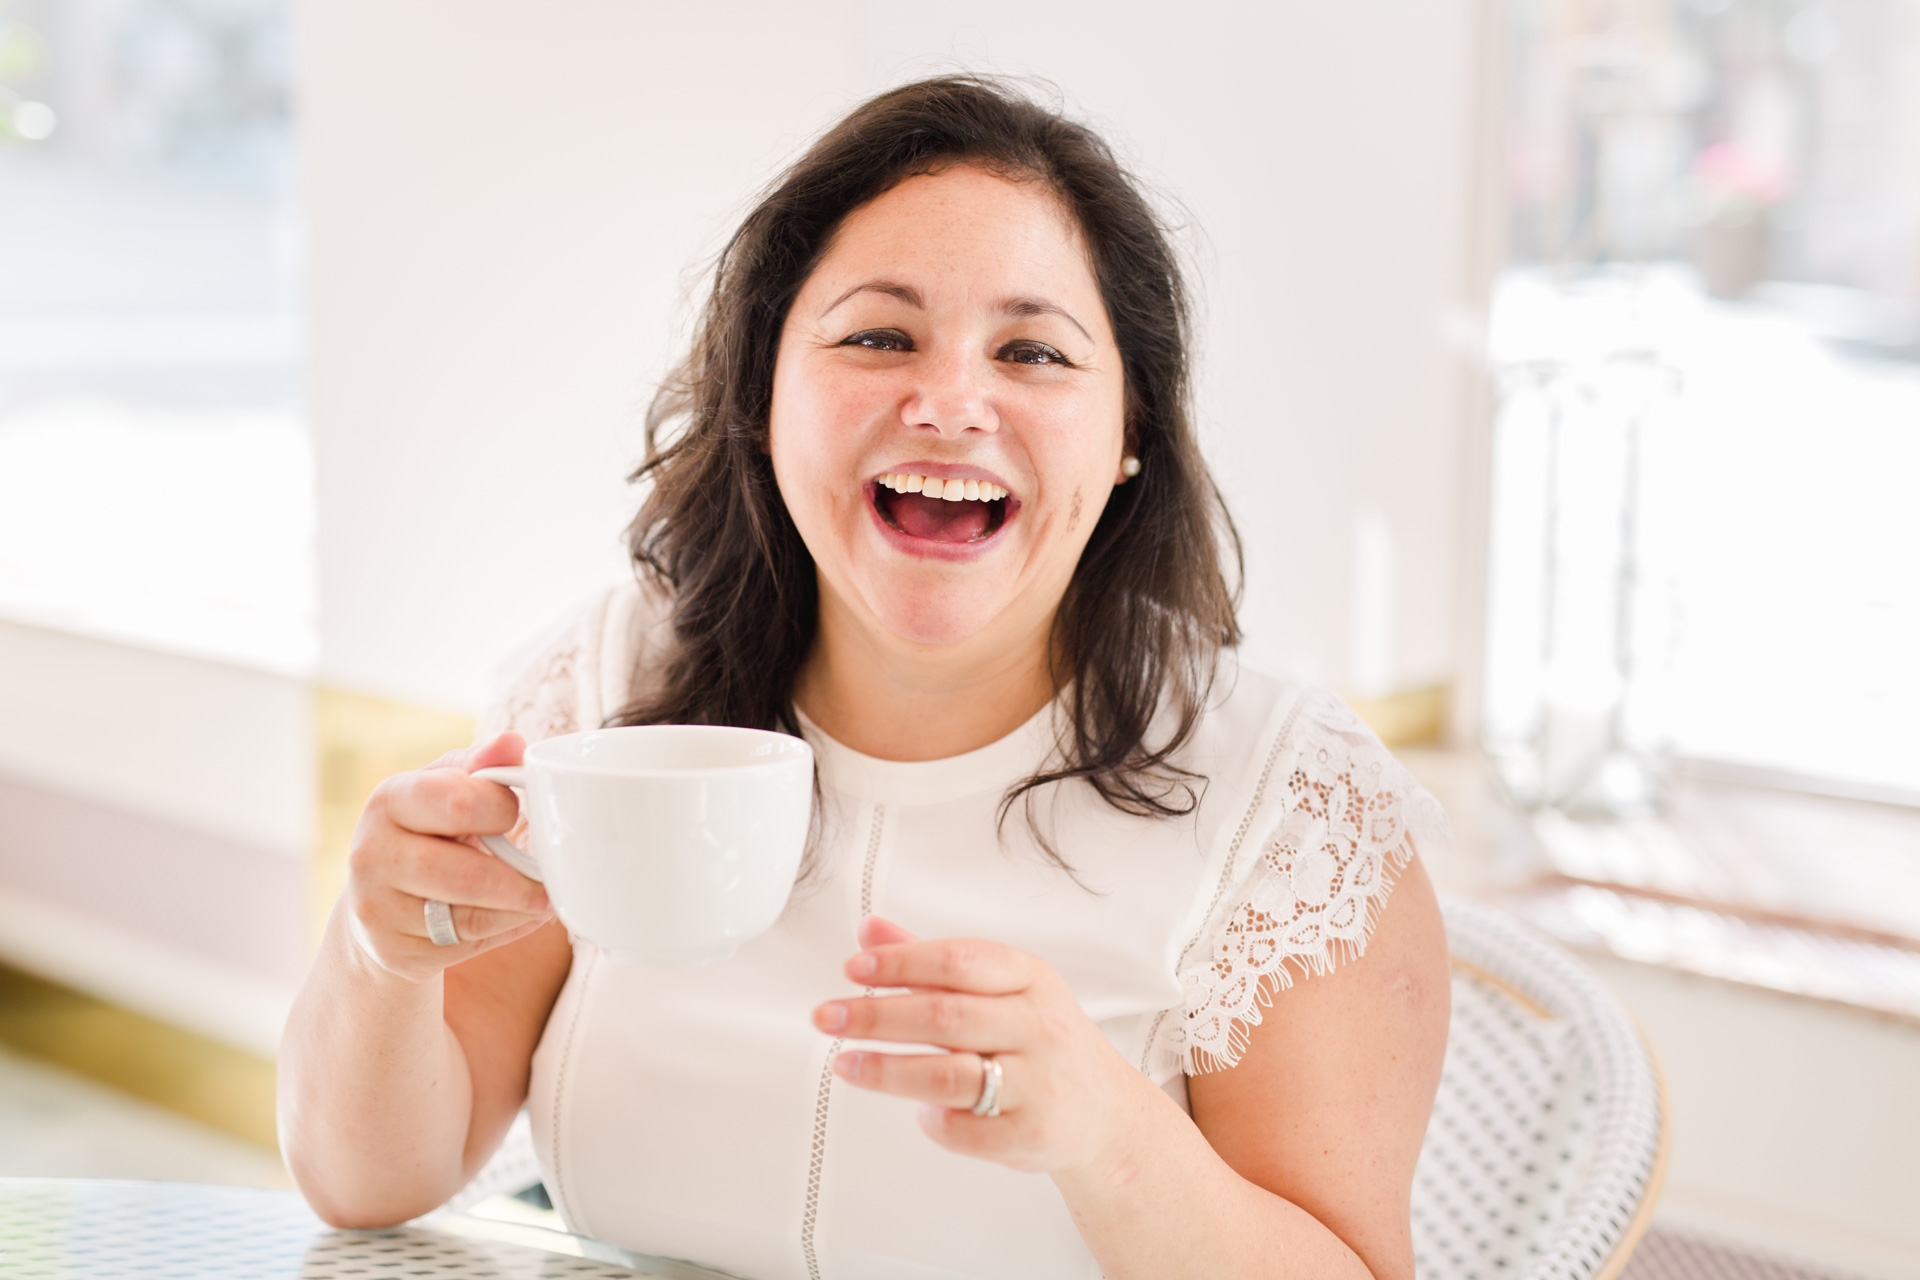 A branding photo of entrepreneur Marjorie Soto Diaz laughing and holding a cup of tea